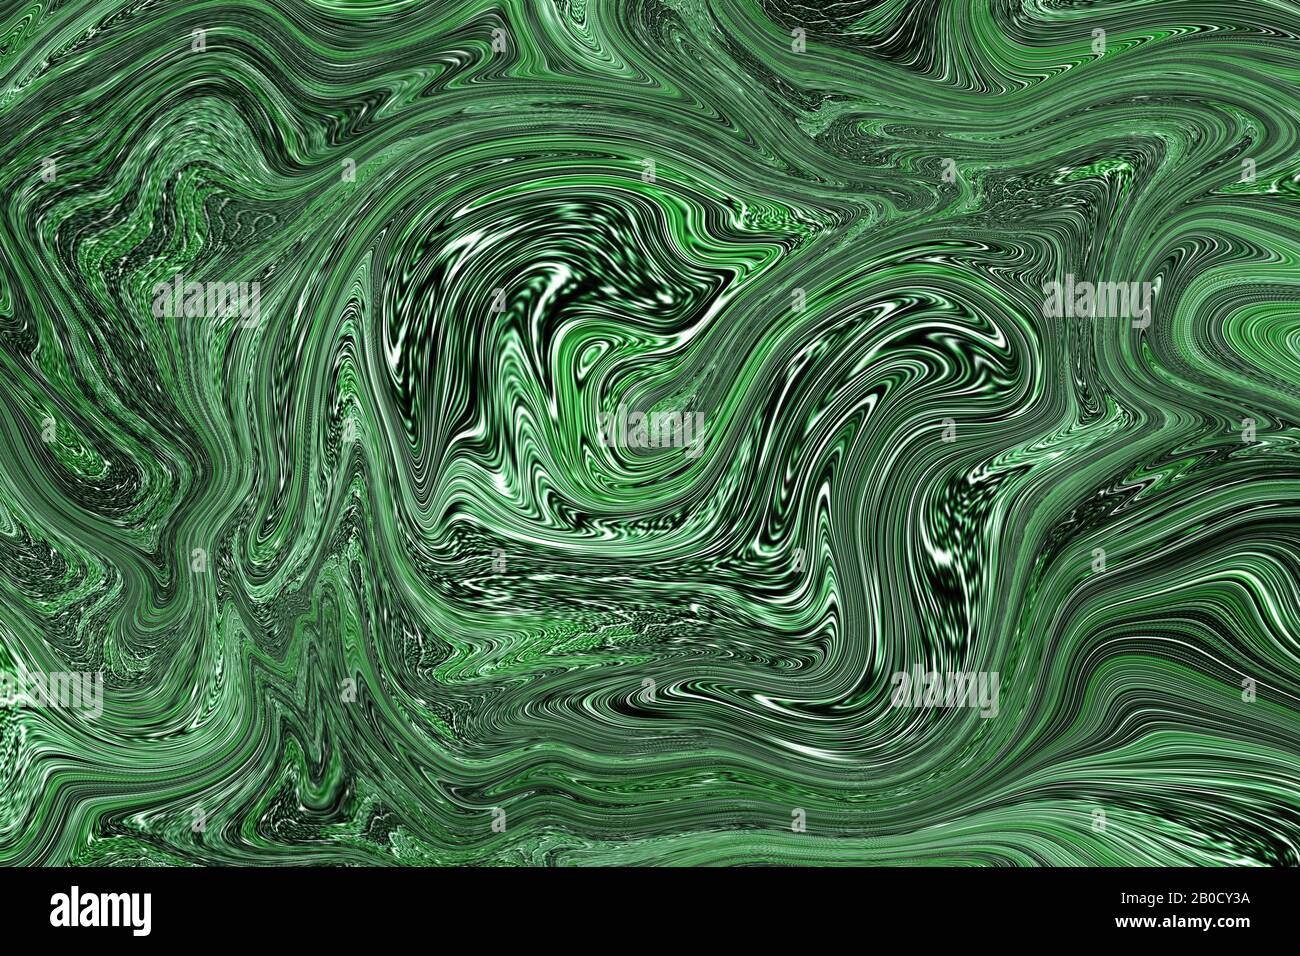 green and black liquid color. abstract background and texture. illustration design. Stock Photo